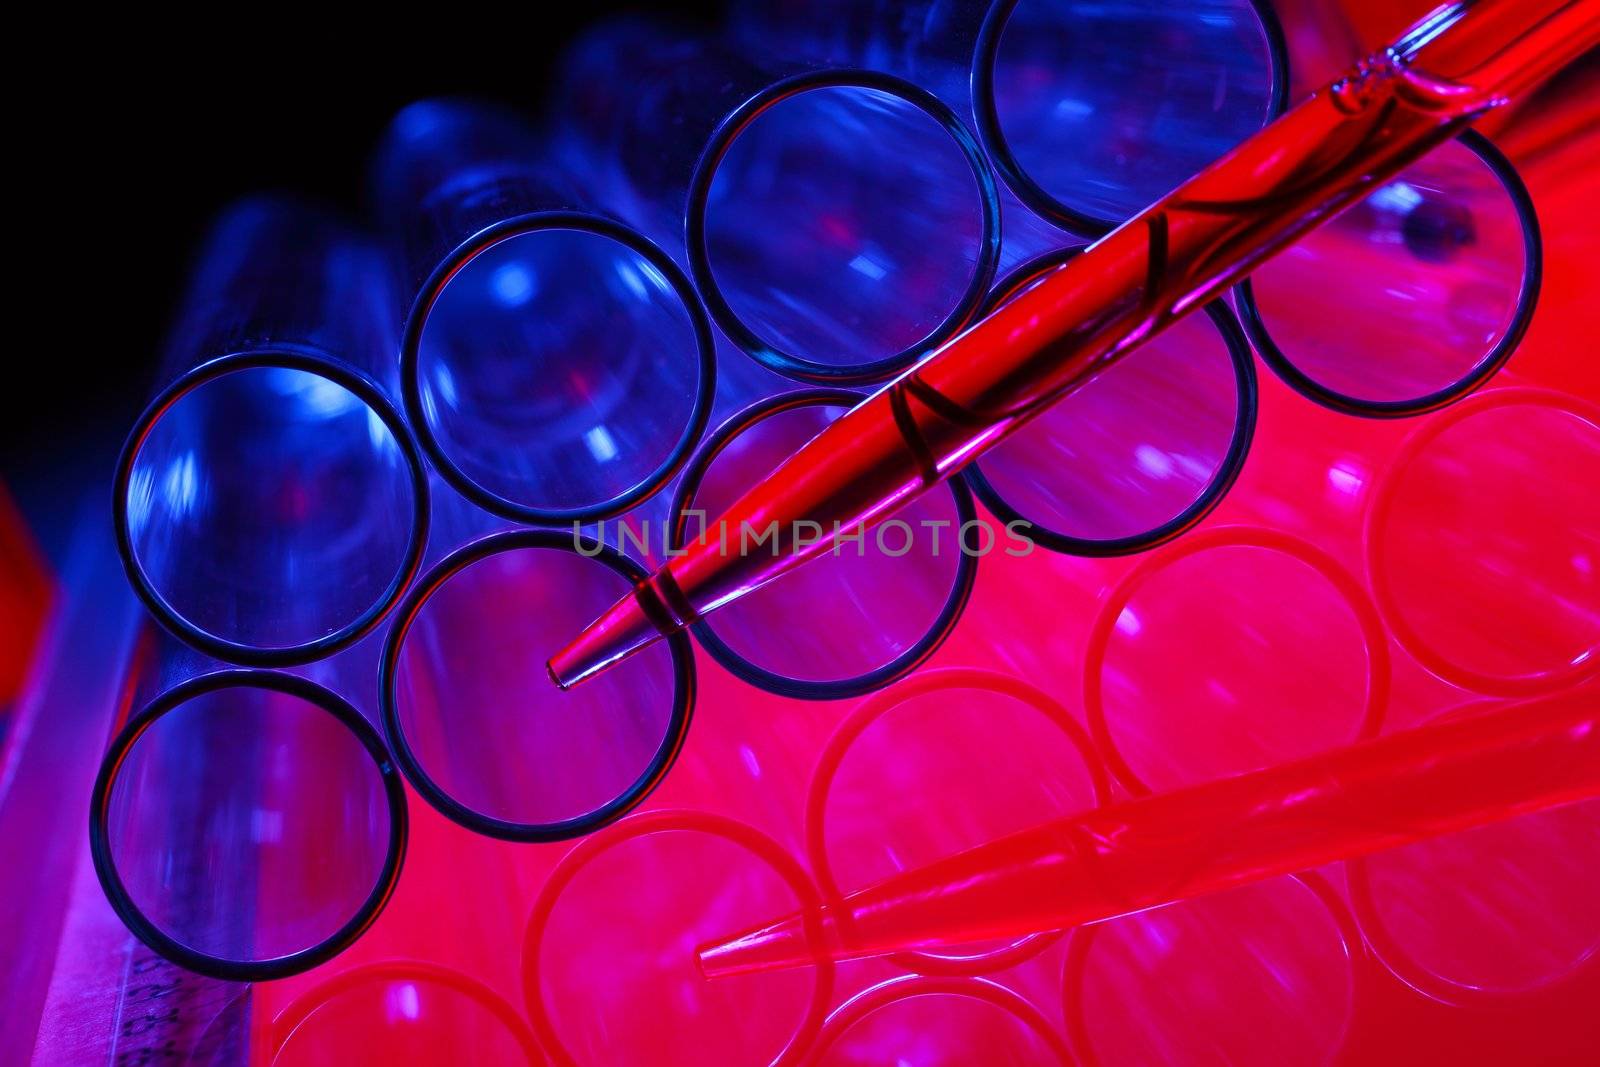 Glass chemistry tubes on a colour background